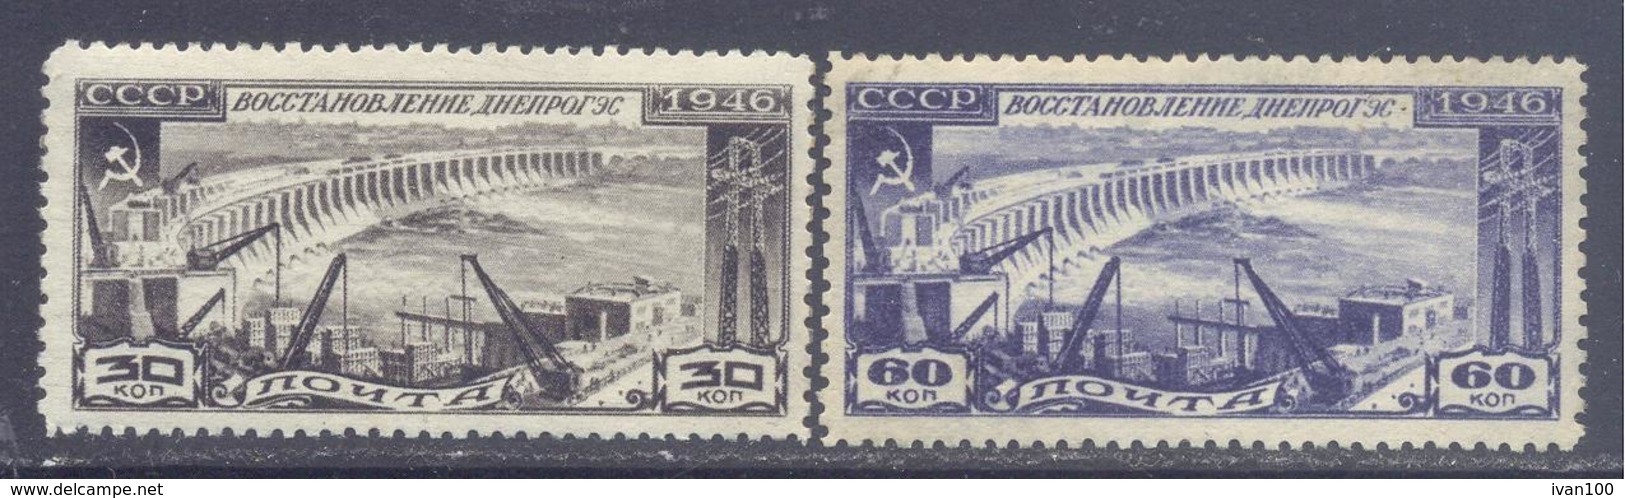 1946. USSR/Russia, Restoration Of Dnepropetrovsk Hydroelectric Power Station, Mich.1079/80, 2v, Unused/mint - Unused Stamps